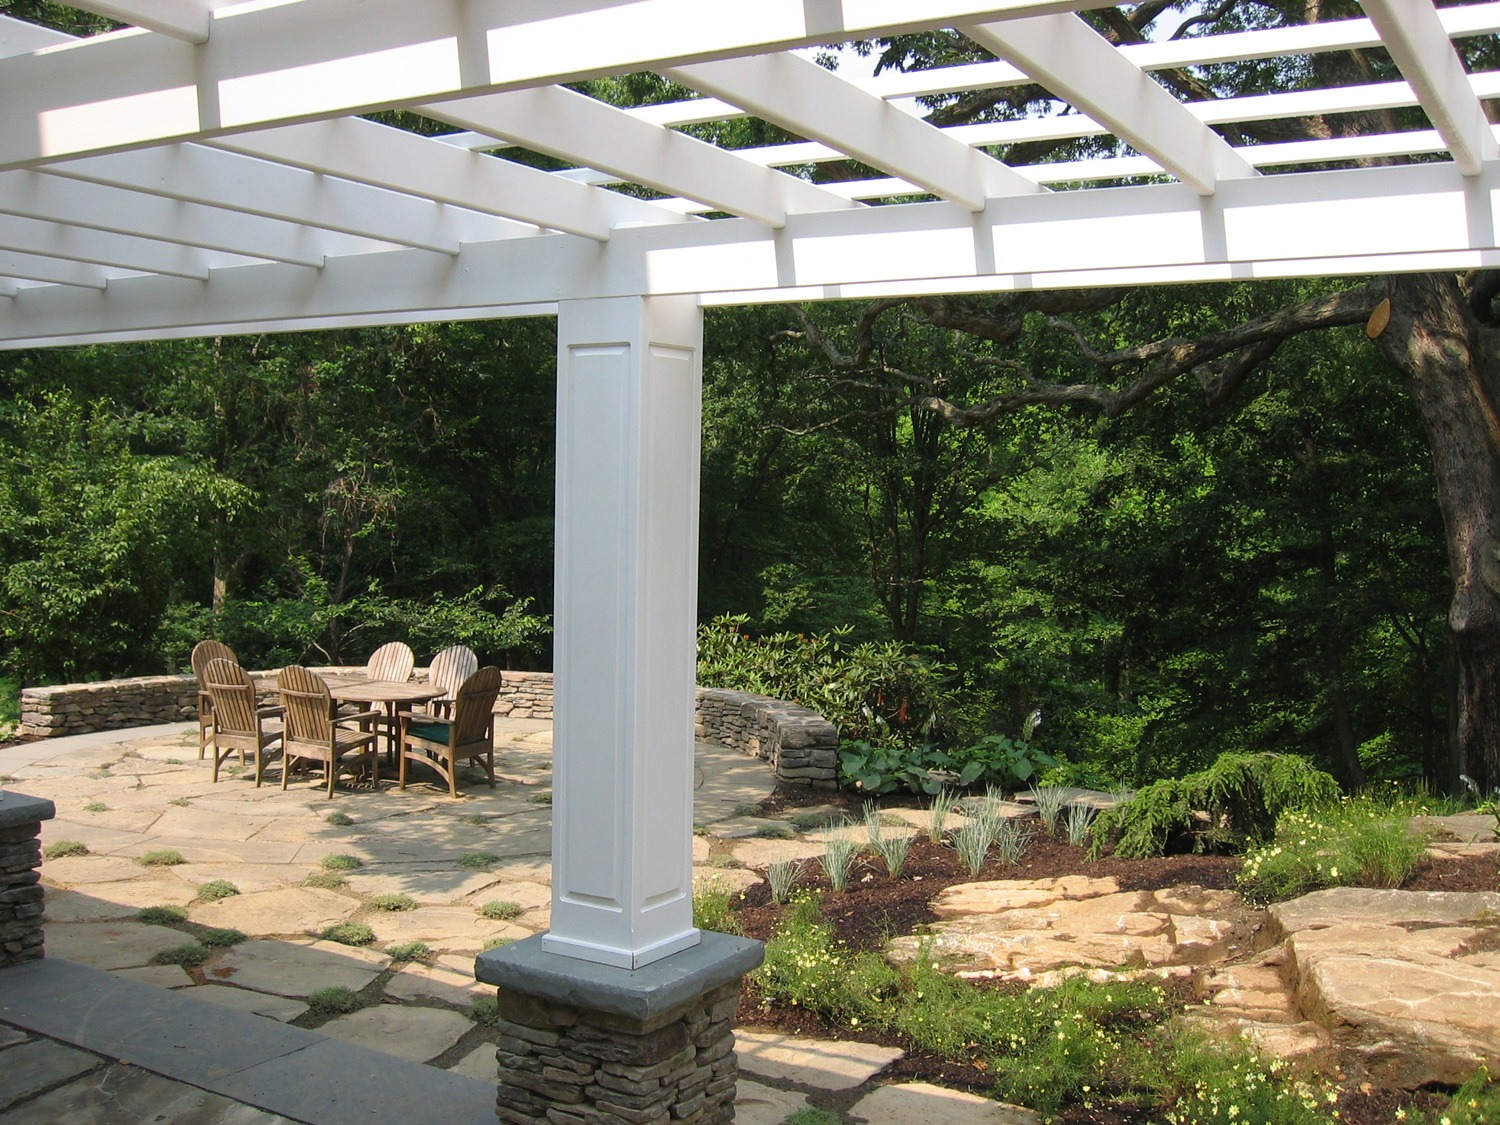 An outdoor patio with a pergola, wooden dining furniture, a stone pathway, landscaped garden beds, and dense trees in the background in daylight.